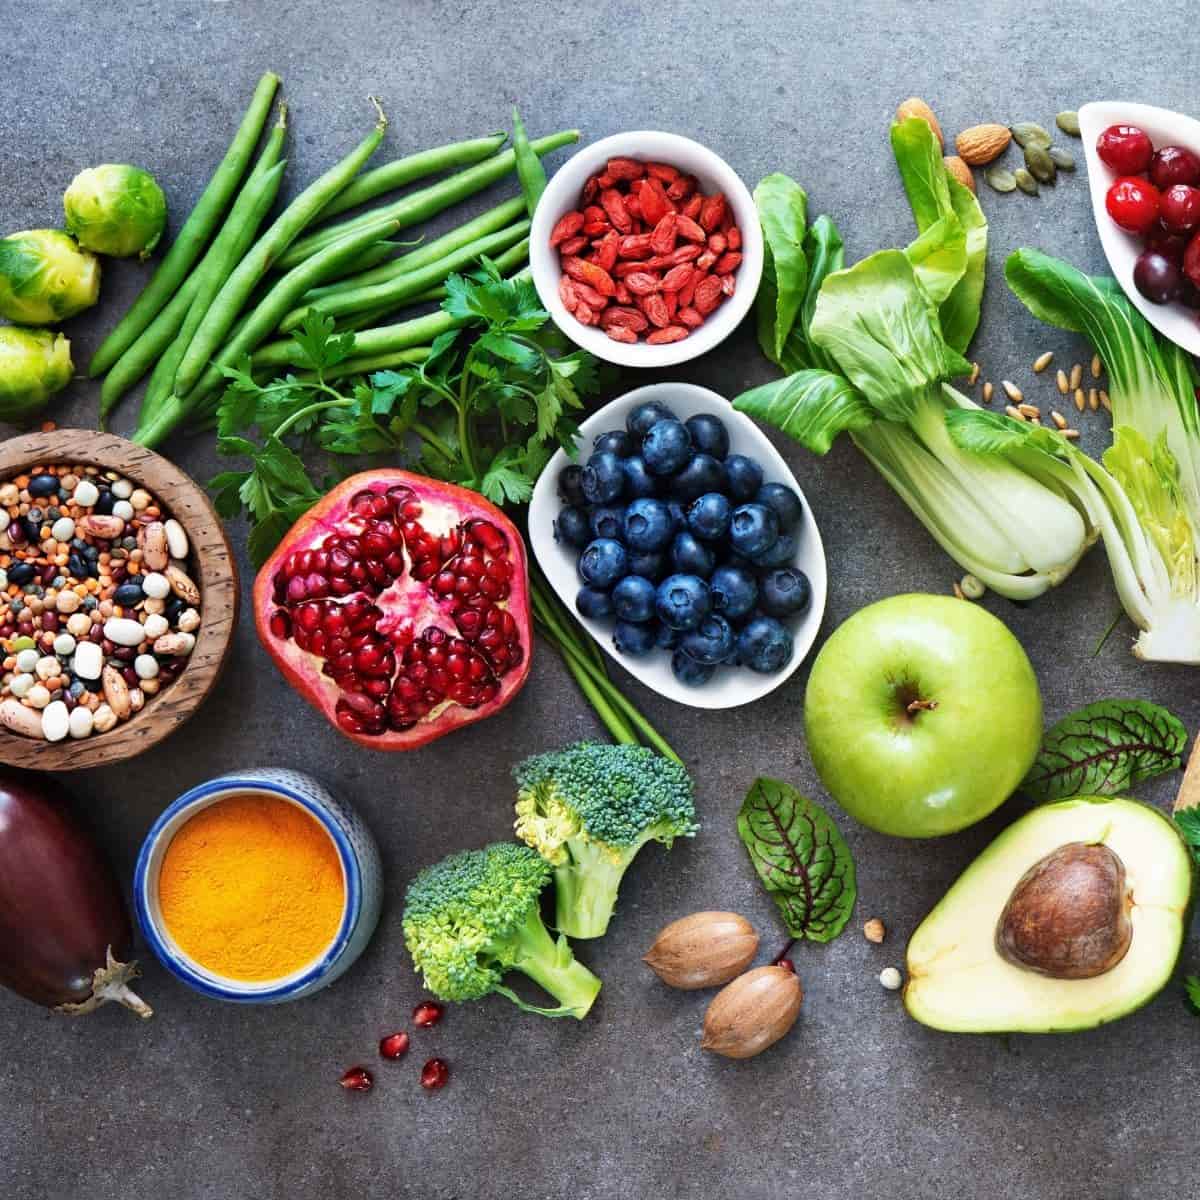 Fruits, vegetables, seeds, and spices on a table.